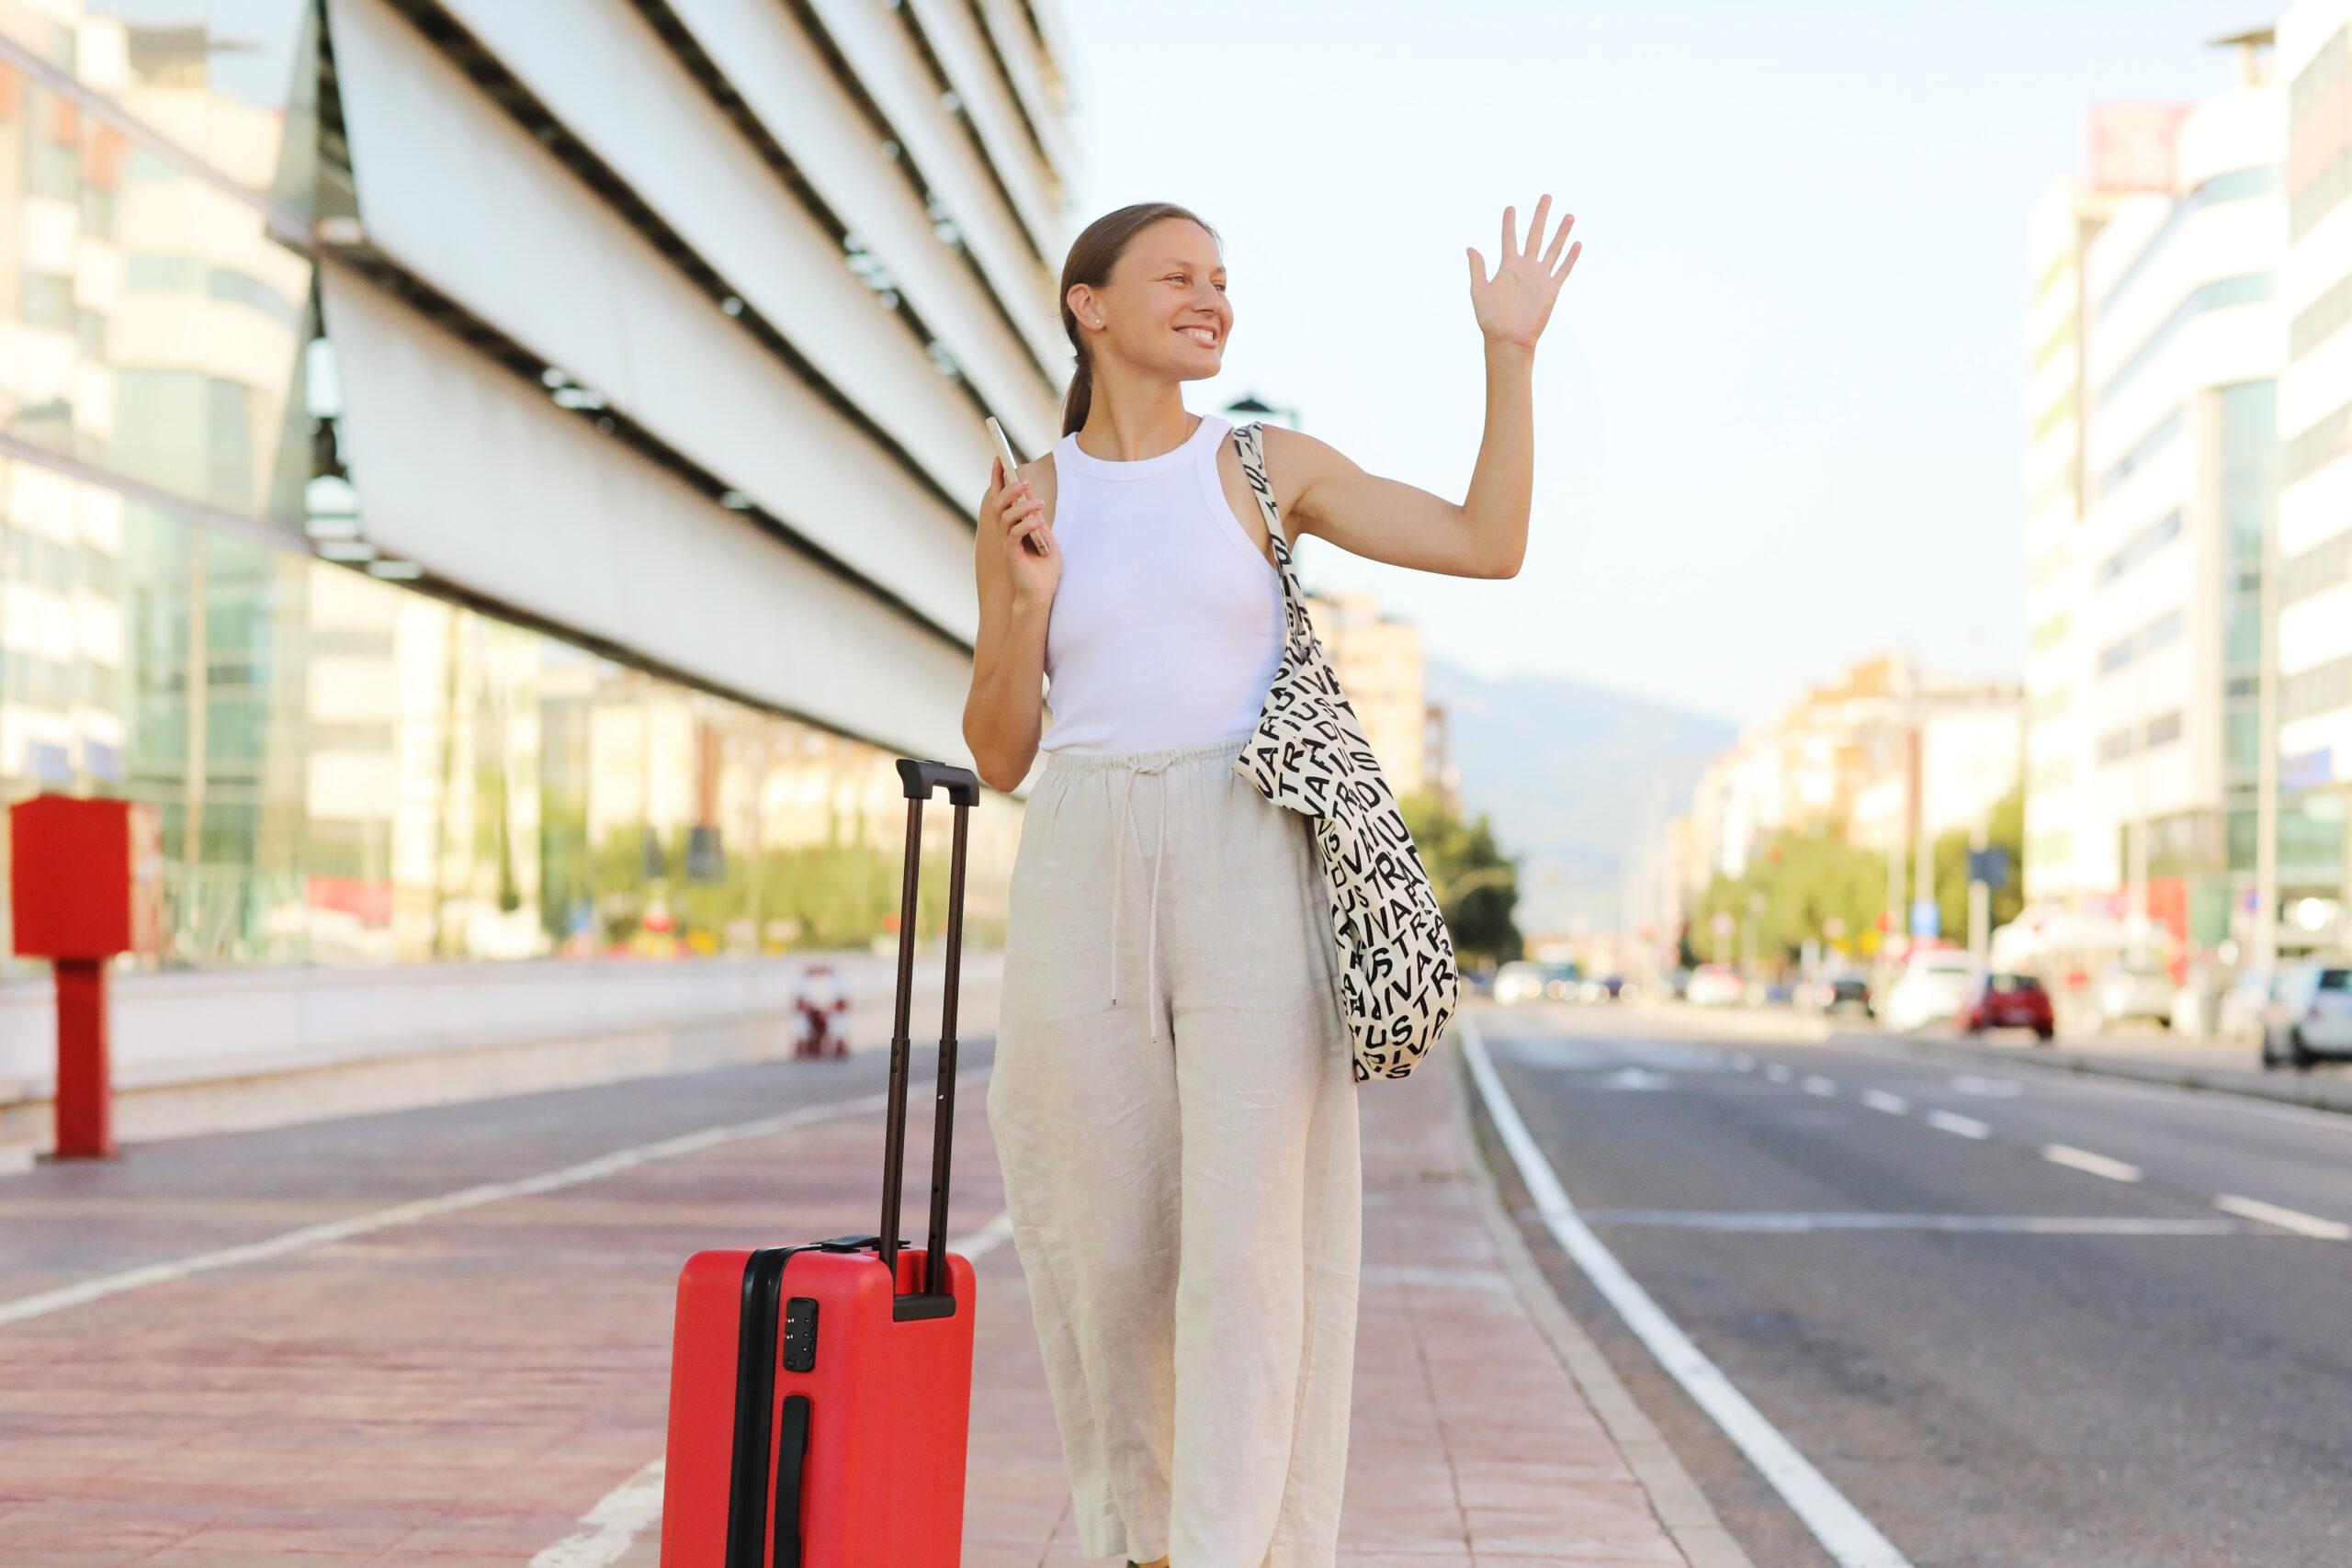 Young Beautiful Woman With Red Suitcase With Smartphone Raising Hand To Catch Taxi Cab At Terminal Or Station. Stylish Smiling Girl Tourist On Summer Holiday Vacation. New Trip